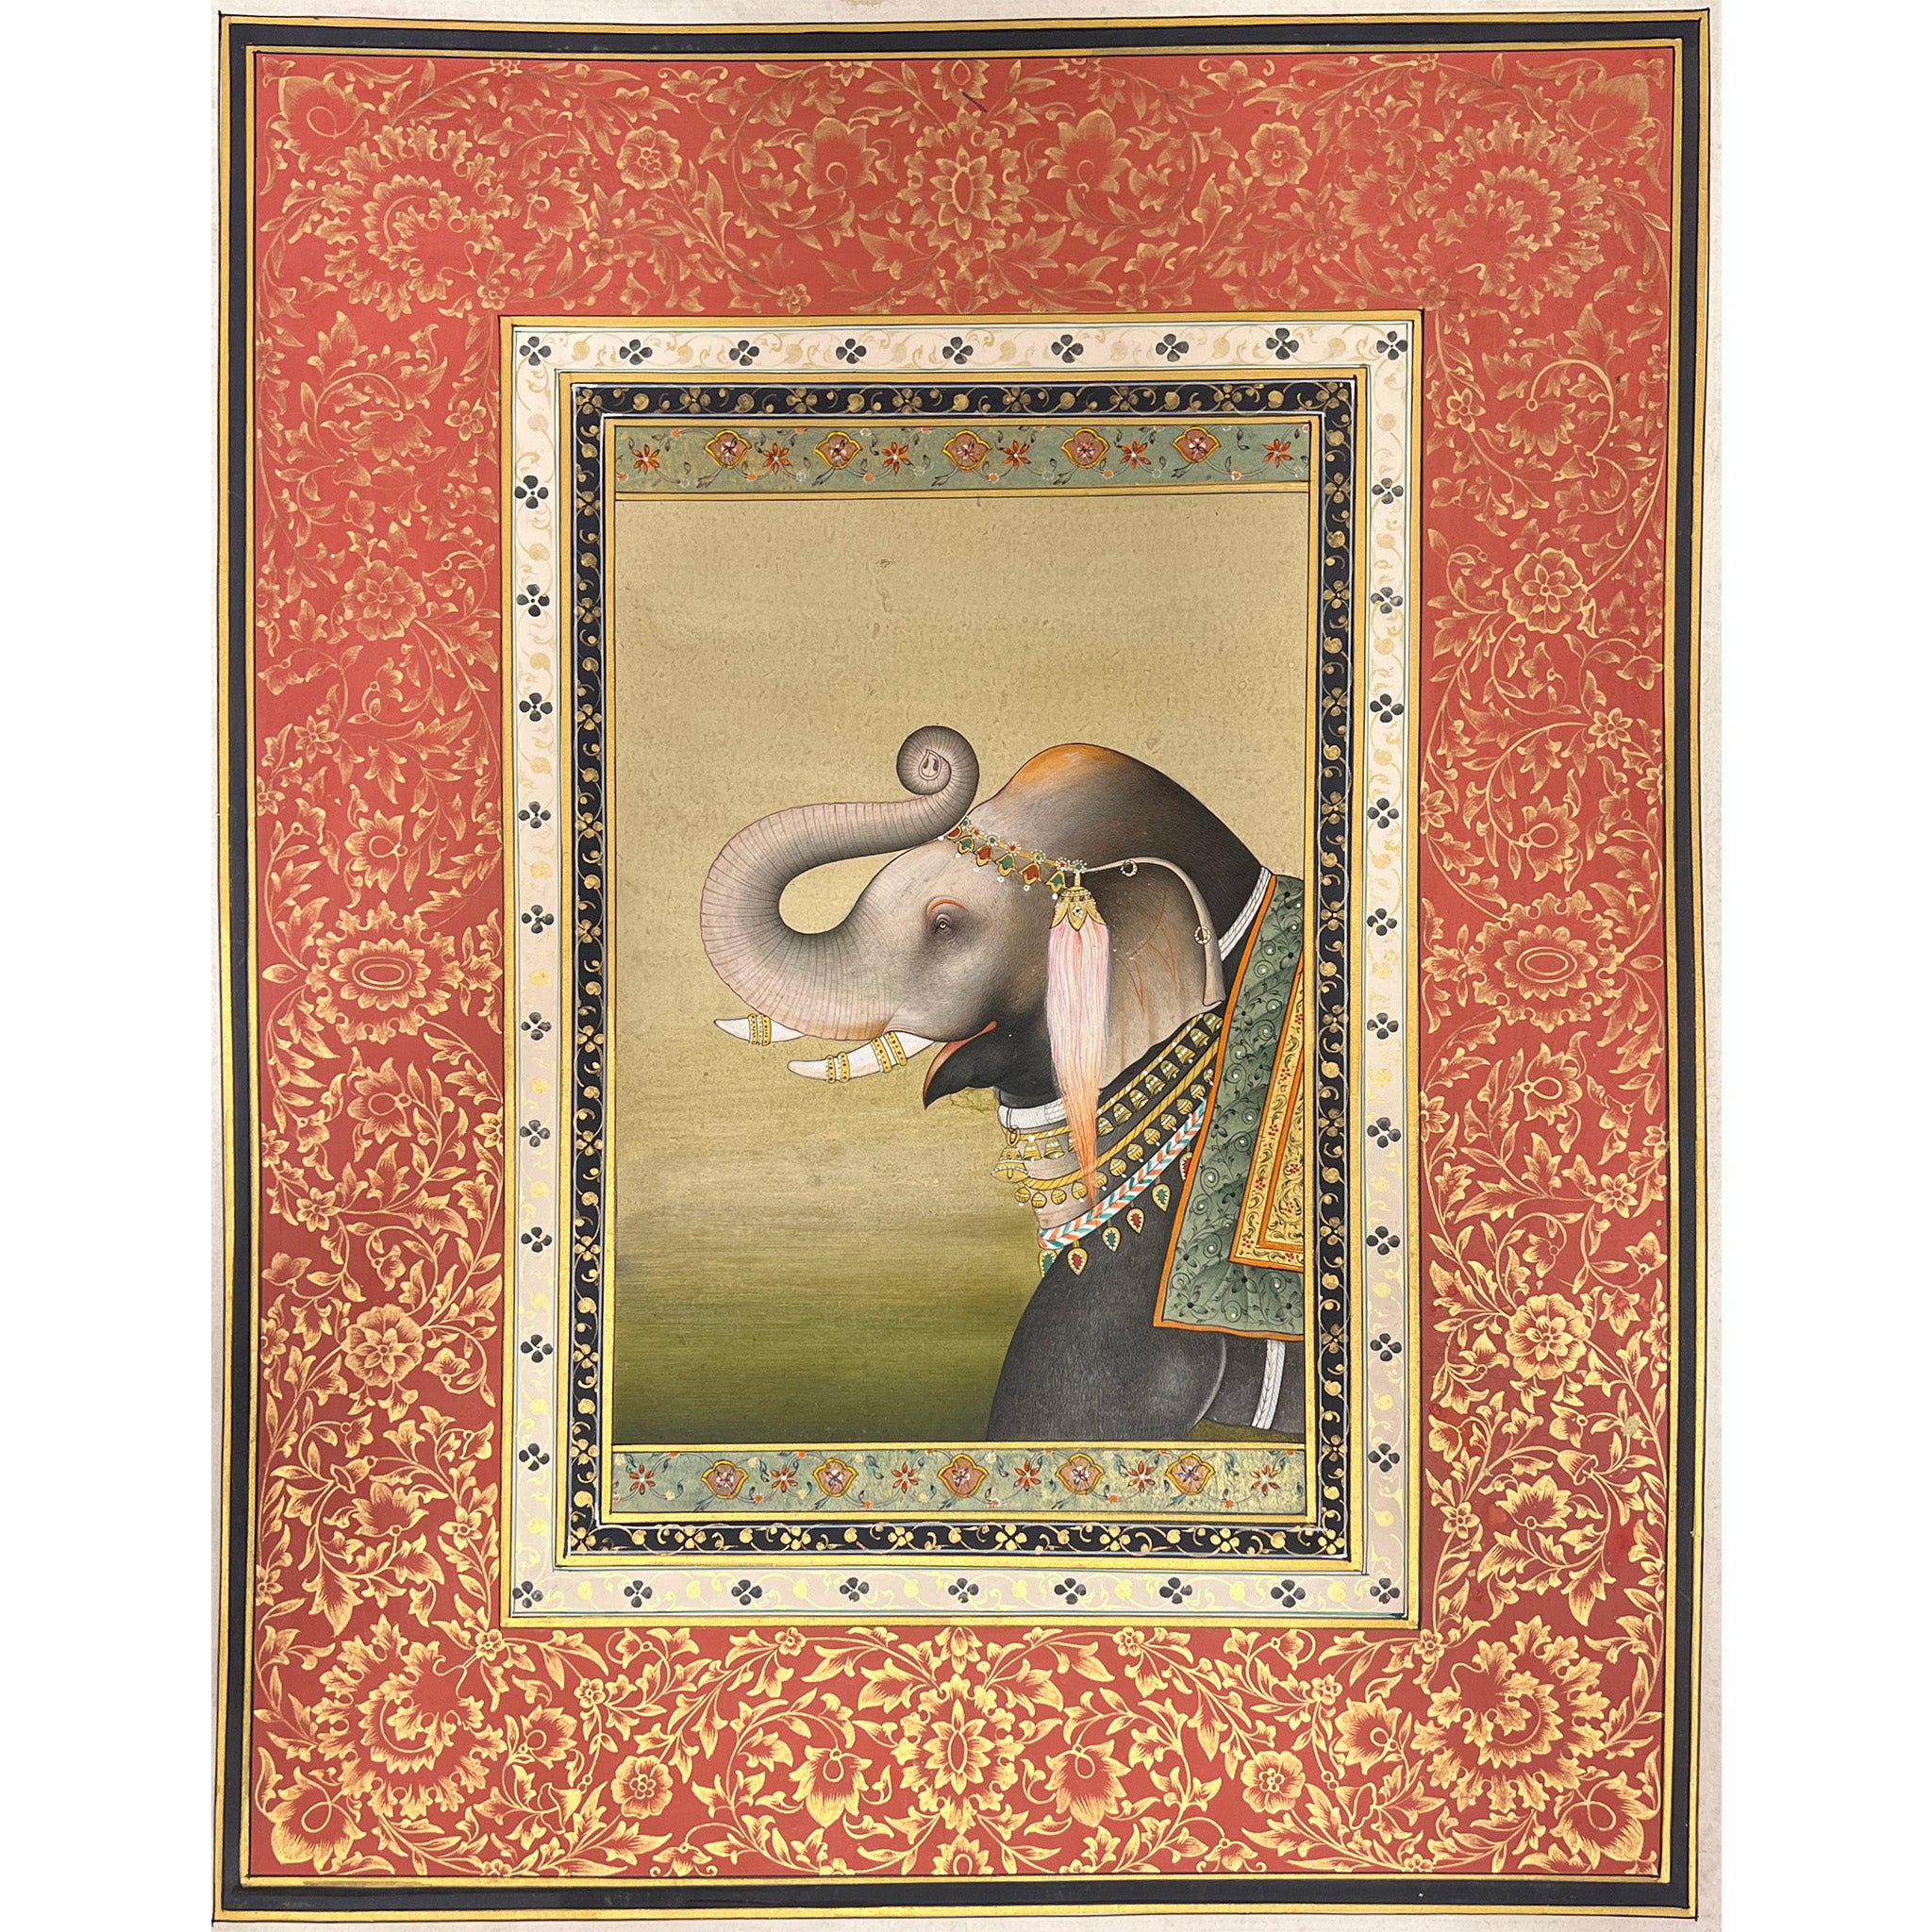 Pair of Elephant Paintings with Gold Filligree Border